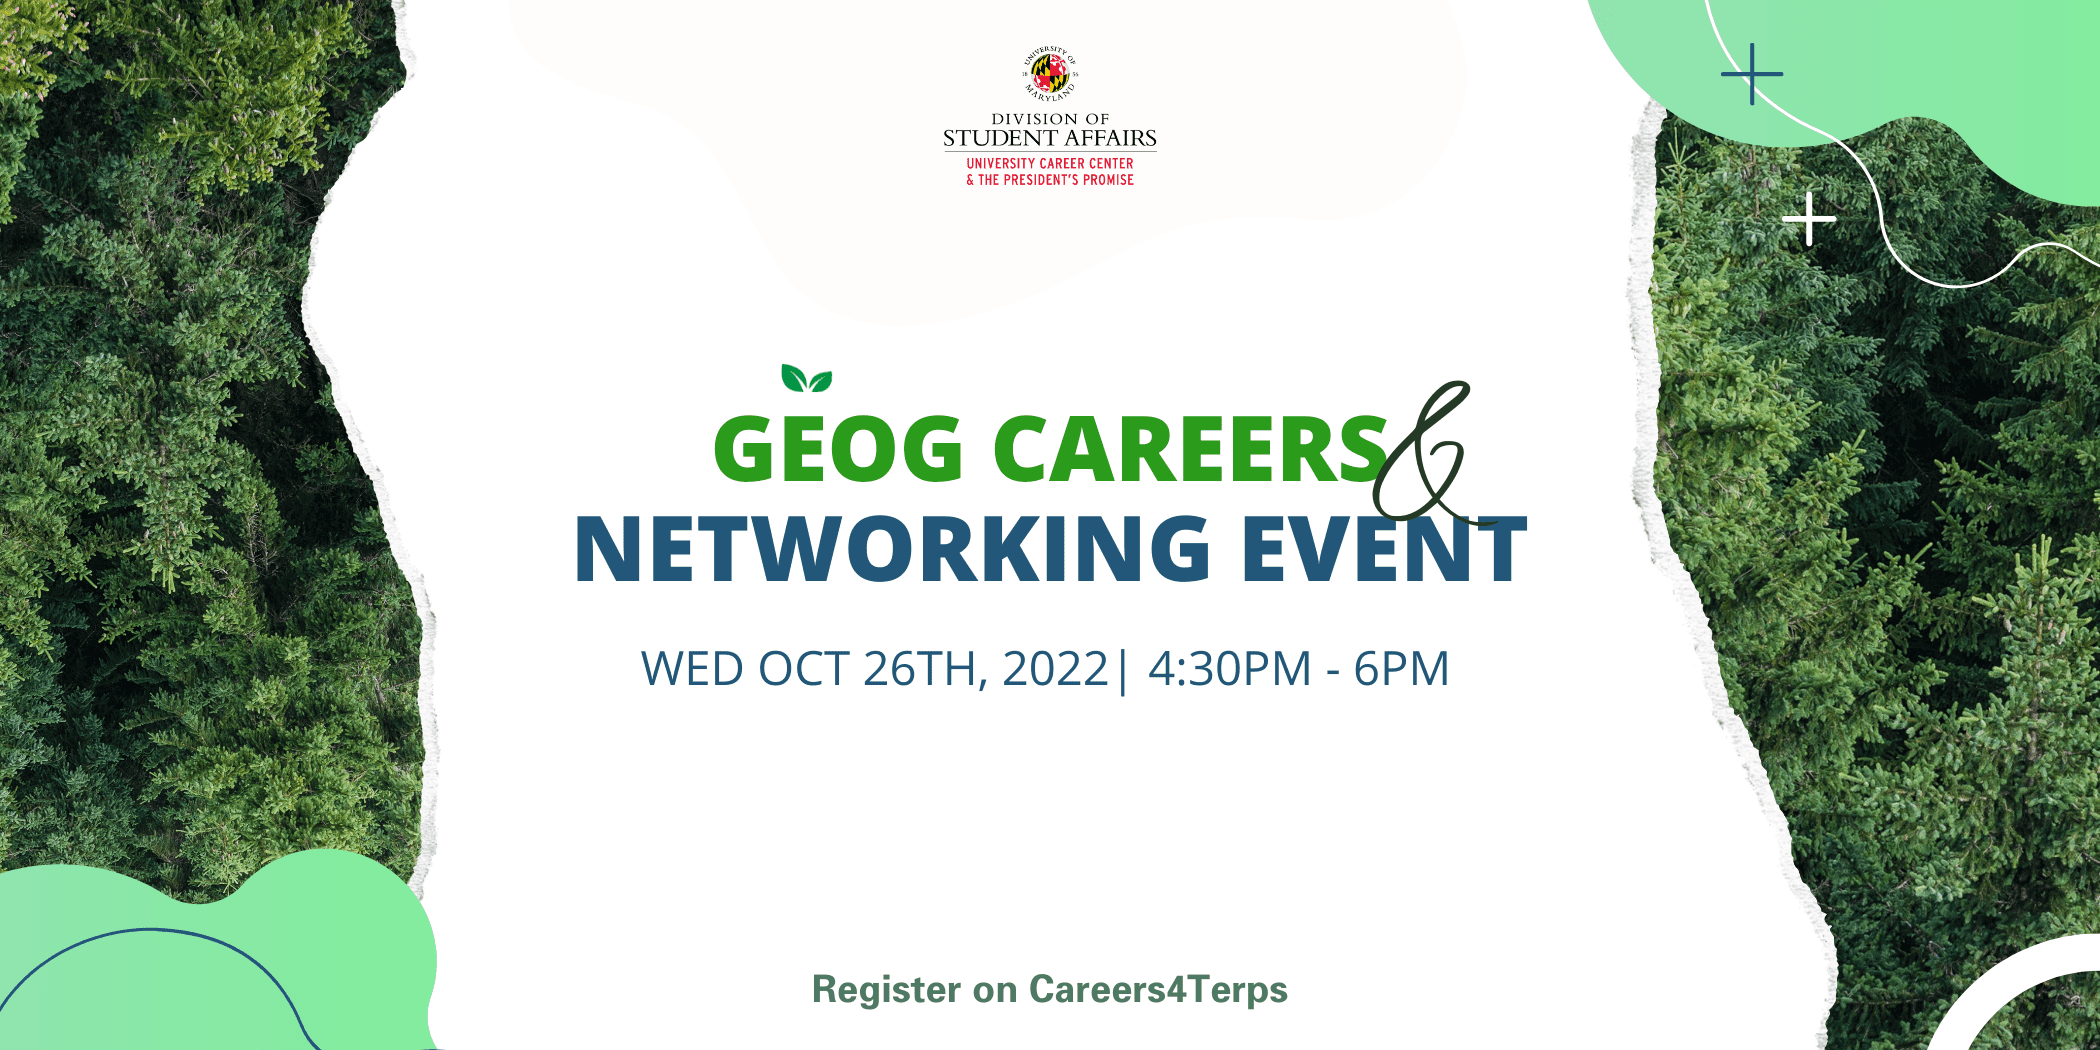 A promotional image for the GEOG Career Networking Event. Time listed is October 26th, 2022 | 4:30-6:30. Image has trees on both sides with text at the bottom that says, "Register on Career for Terps".